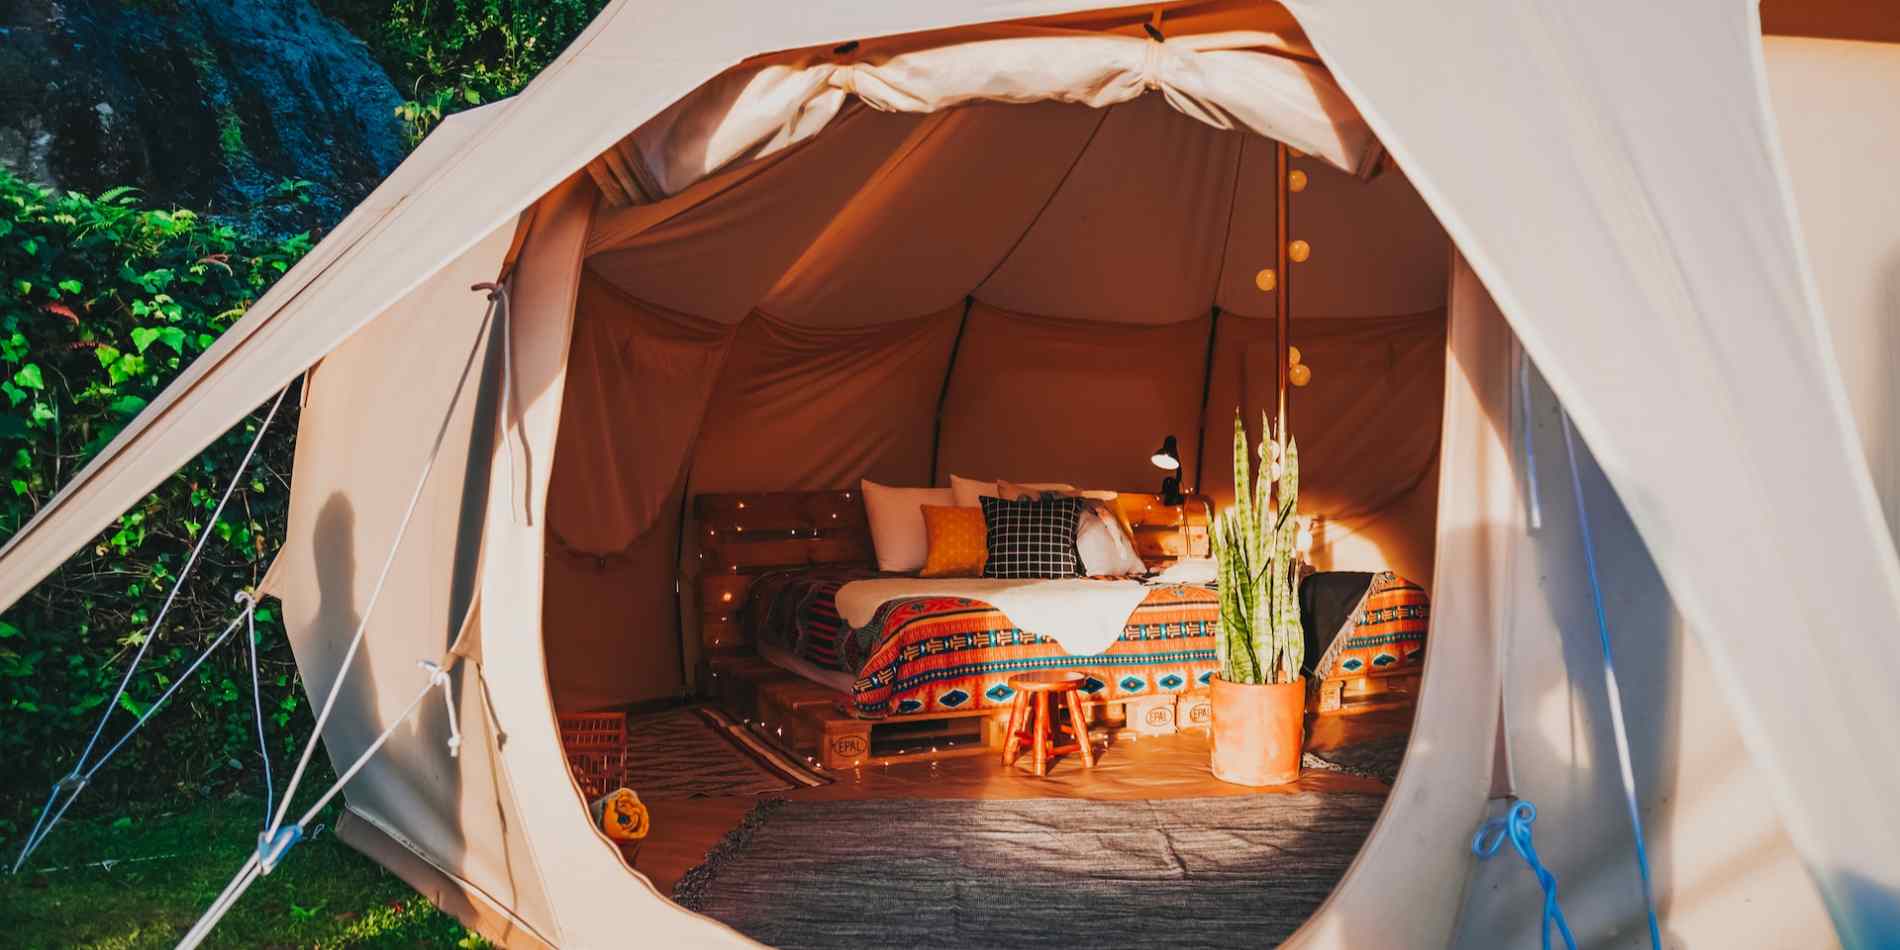 Glamping tent, bed, and glamping accessories